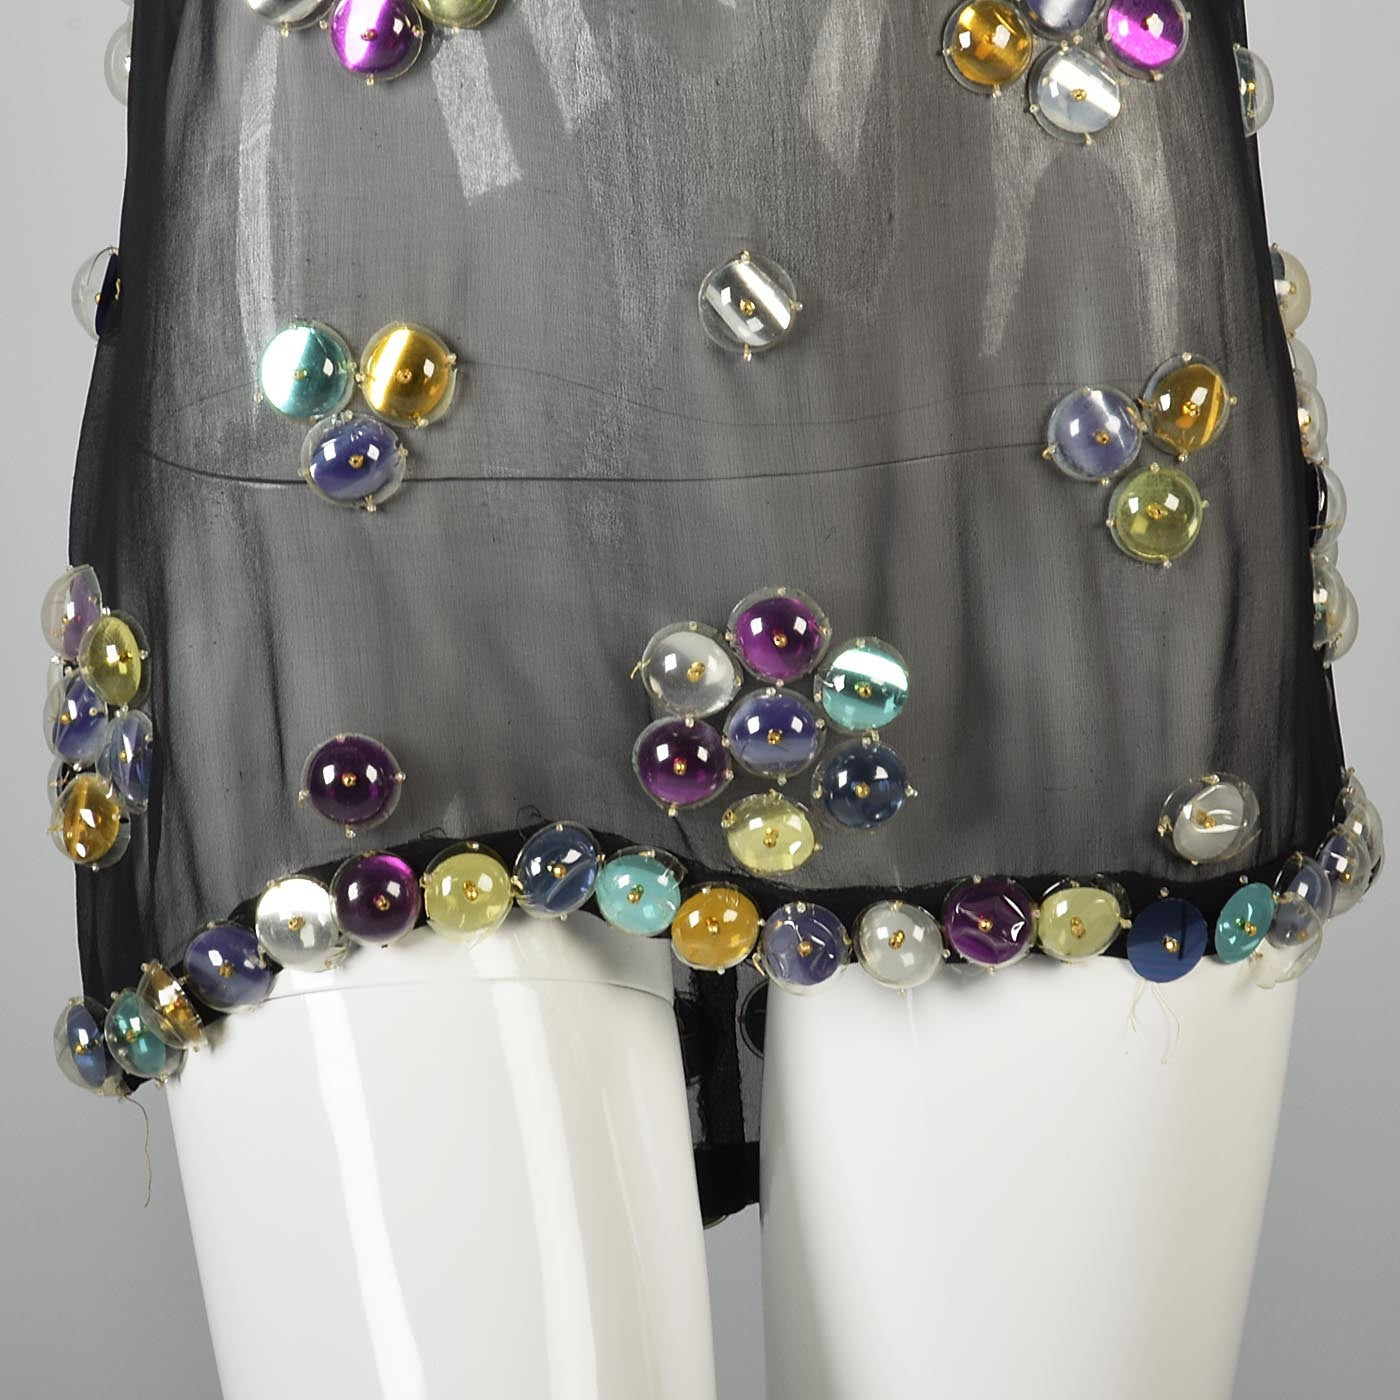 1960s Space Age Mod Sheer Silk Blouse with Bubble Sequins